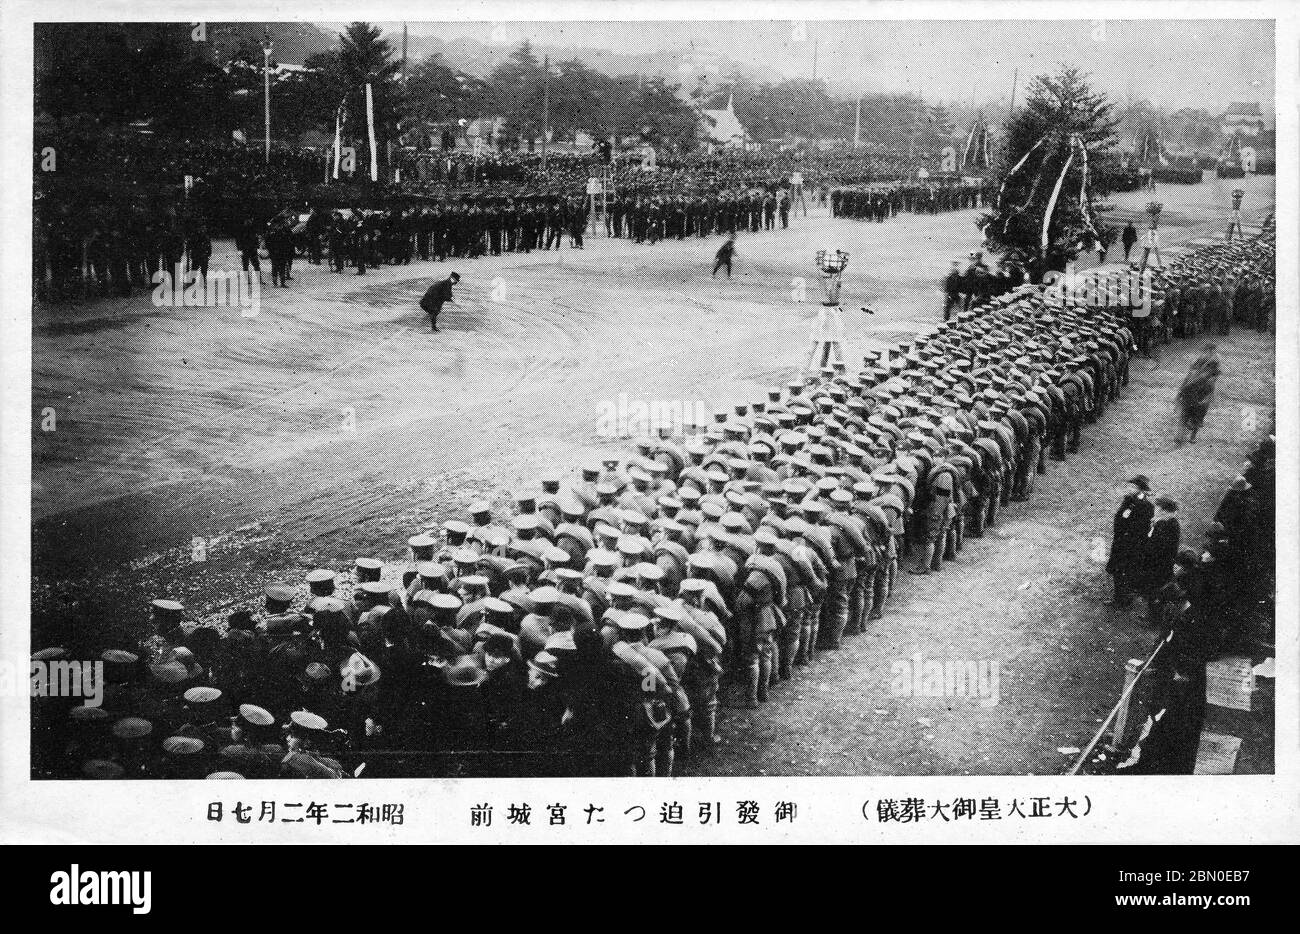 [ 1927 Japan - Emperor Taisho's Funeral ] —   People and soldiers awaiting the funeral procession of Emperor Taisho in front of the Imperial Palace in Tokyo on February 7, 1927 (Showa 2).  Original caption: 大正大皇御大葬儀）御發引迫つた宮城前　昭和二年二月七日  20th century vintage postcard. Stock Photo